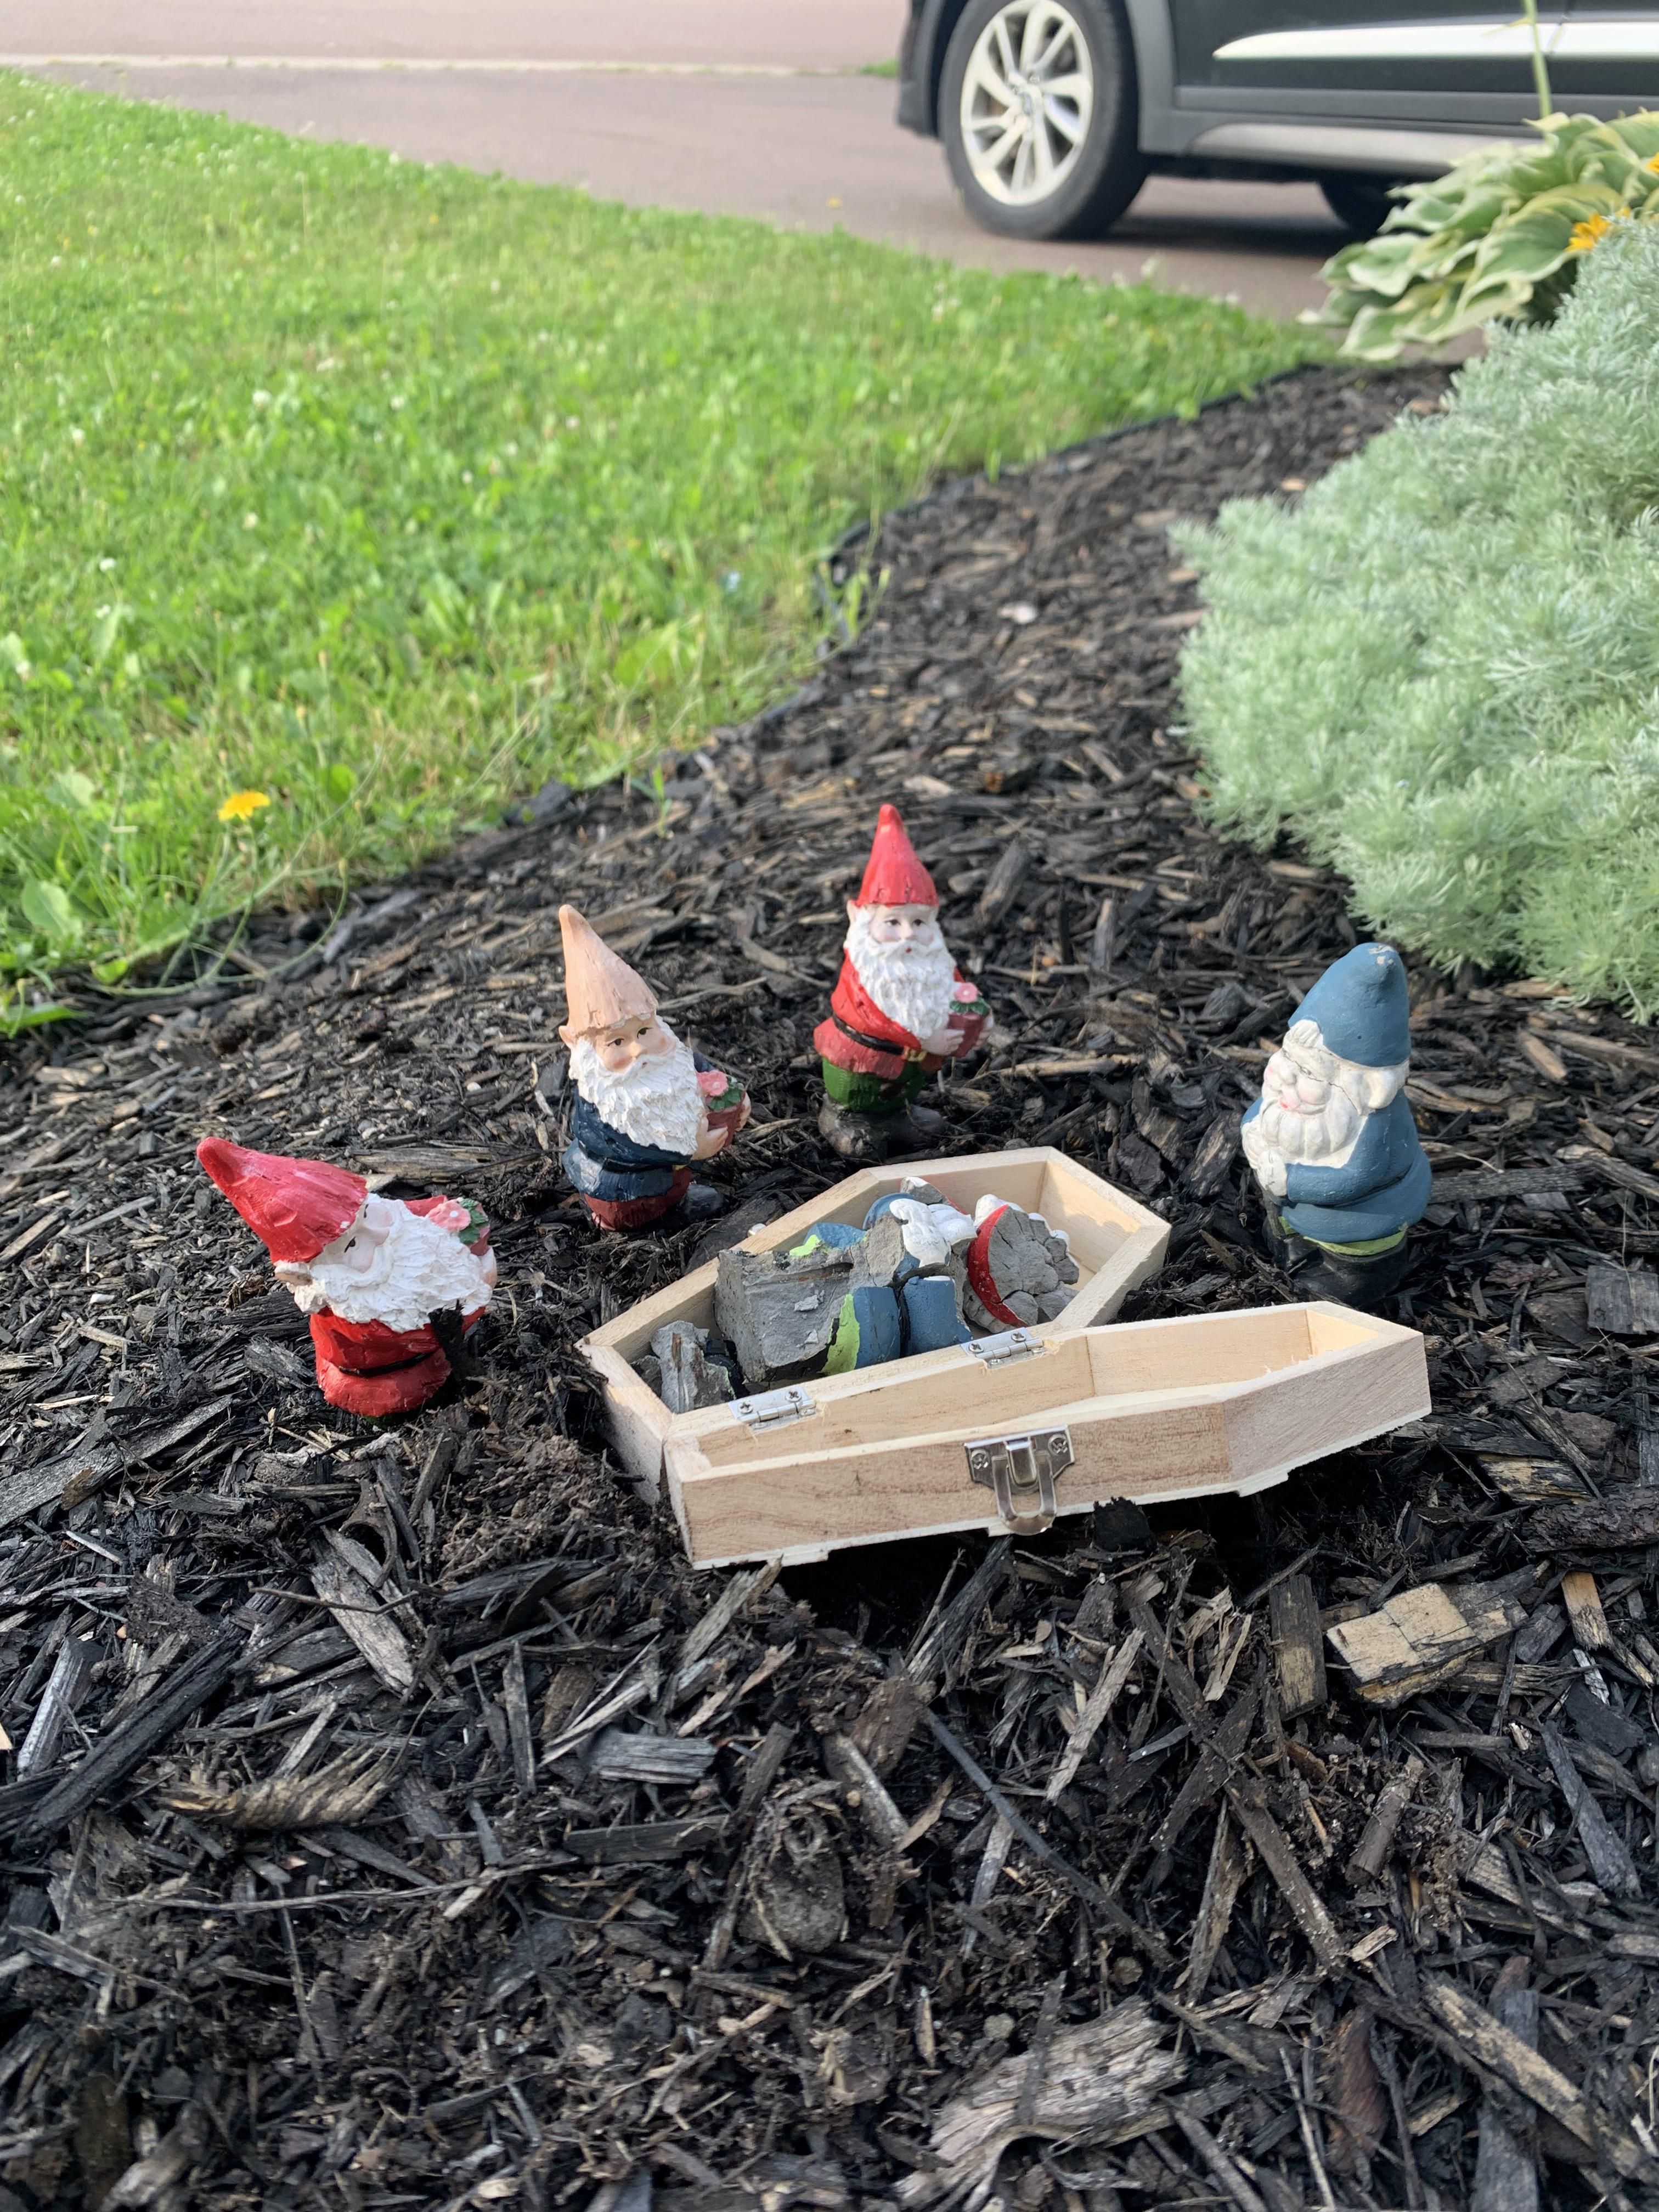 One of my garden gnomes sadly passed away this year. So with the help of my crafty neighbour, we are holding a funeral service in his honour for the rest of summer.